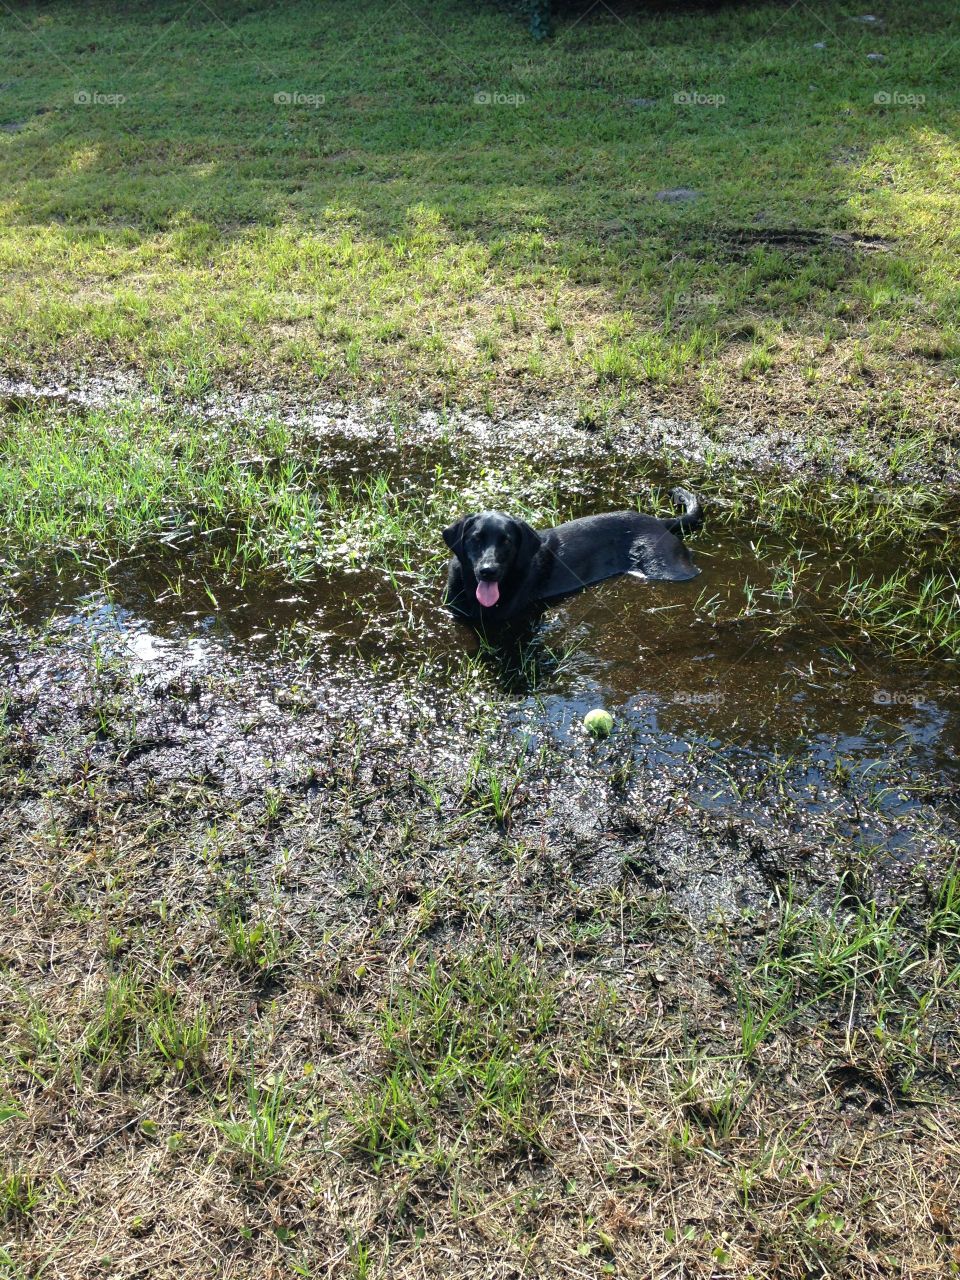 Puddle love. Playing with the ball and found a puddle 